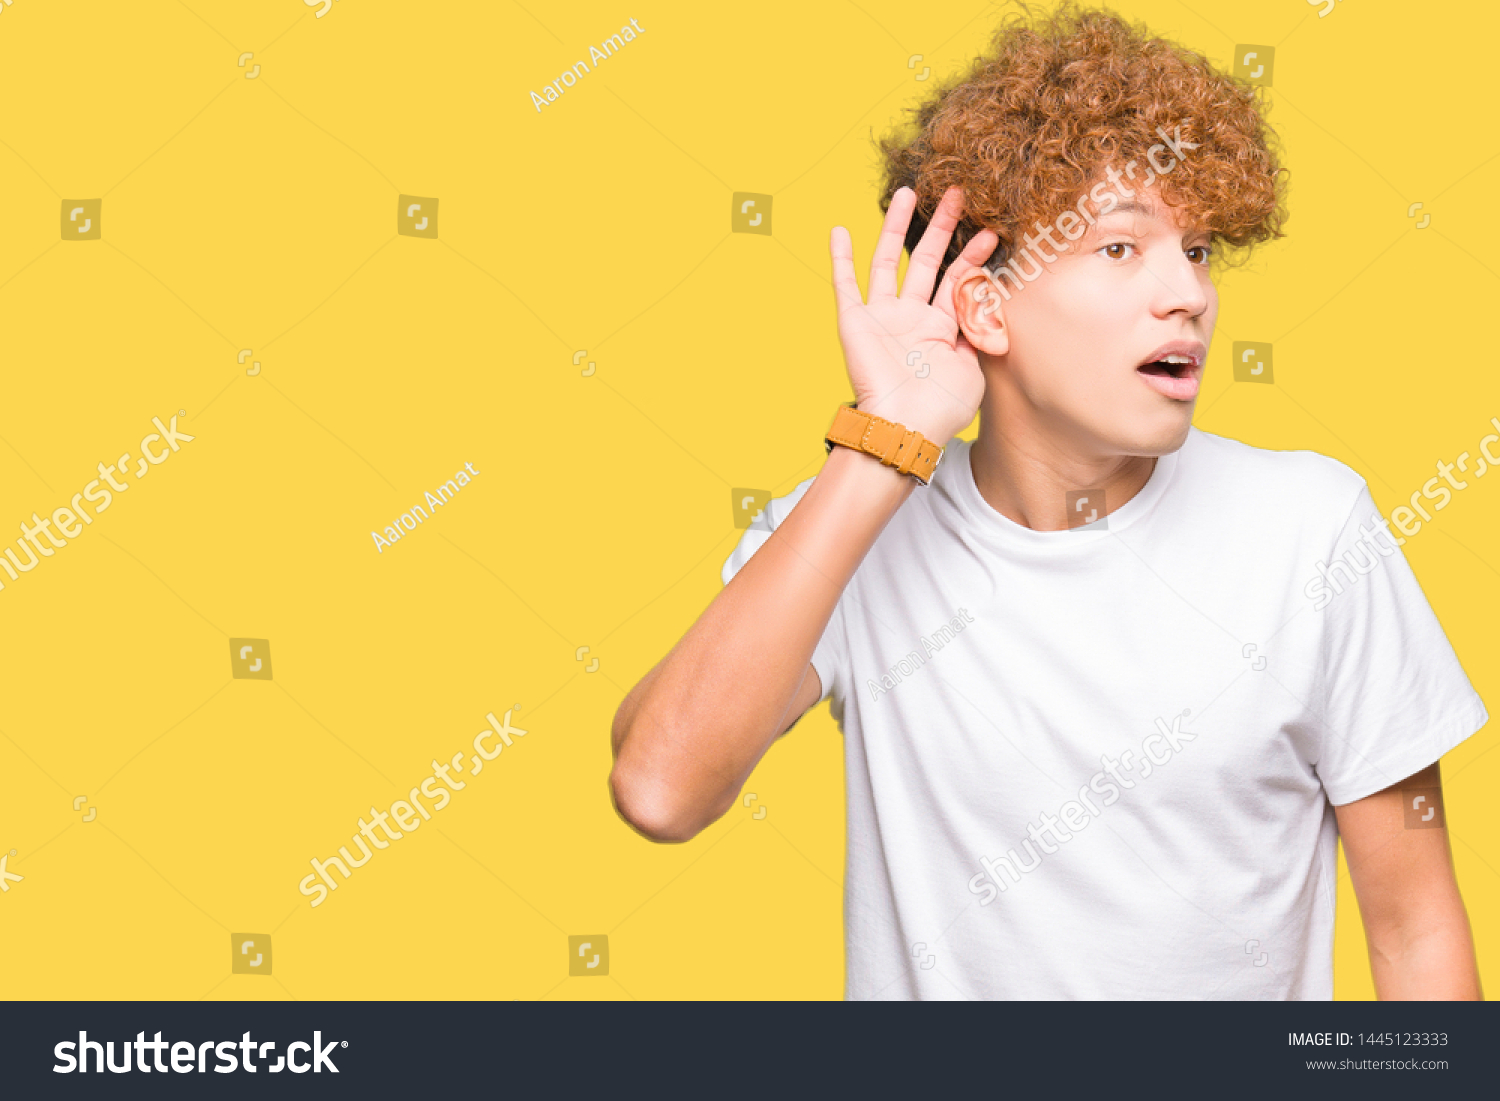 Young handsome man with afro hair wearing casual white t-shirt smiling with hand over ear listening an hearing to rumor or gossip. Deafness concept. #1445123333